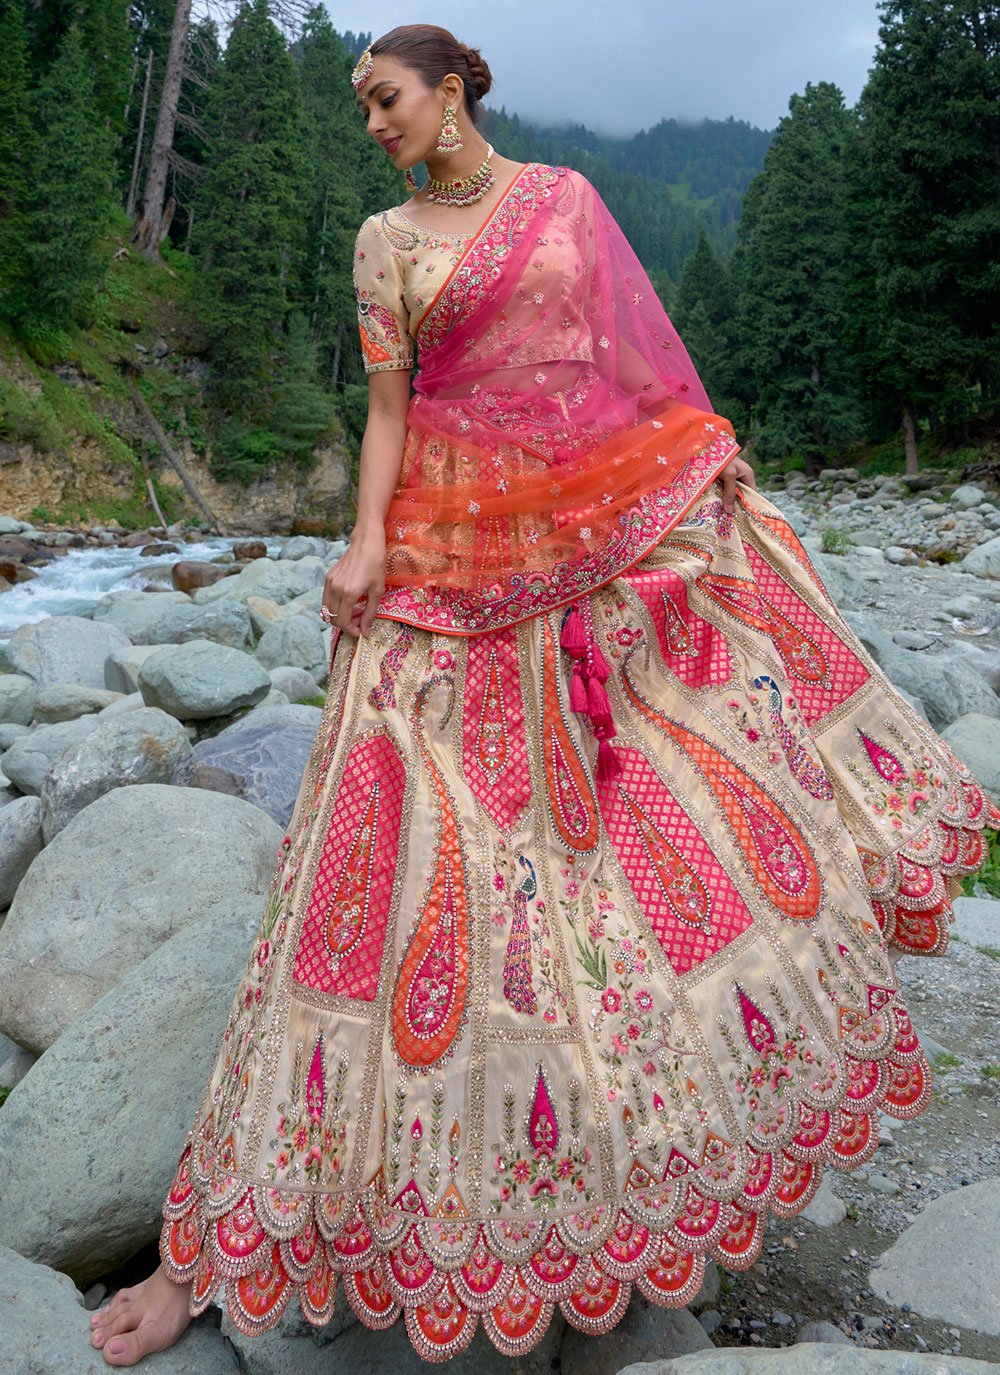 Organza Fabric Cream Colour Semi-Stitched Lehenga with Embroidered,Mirror  work & Choli with Net Dupatta in Sequence Work